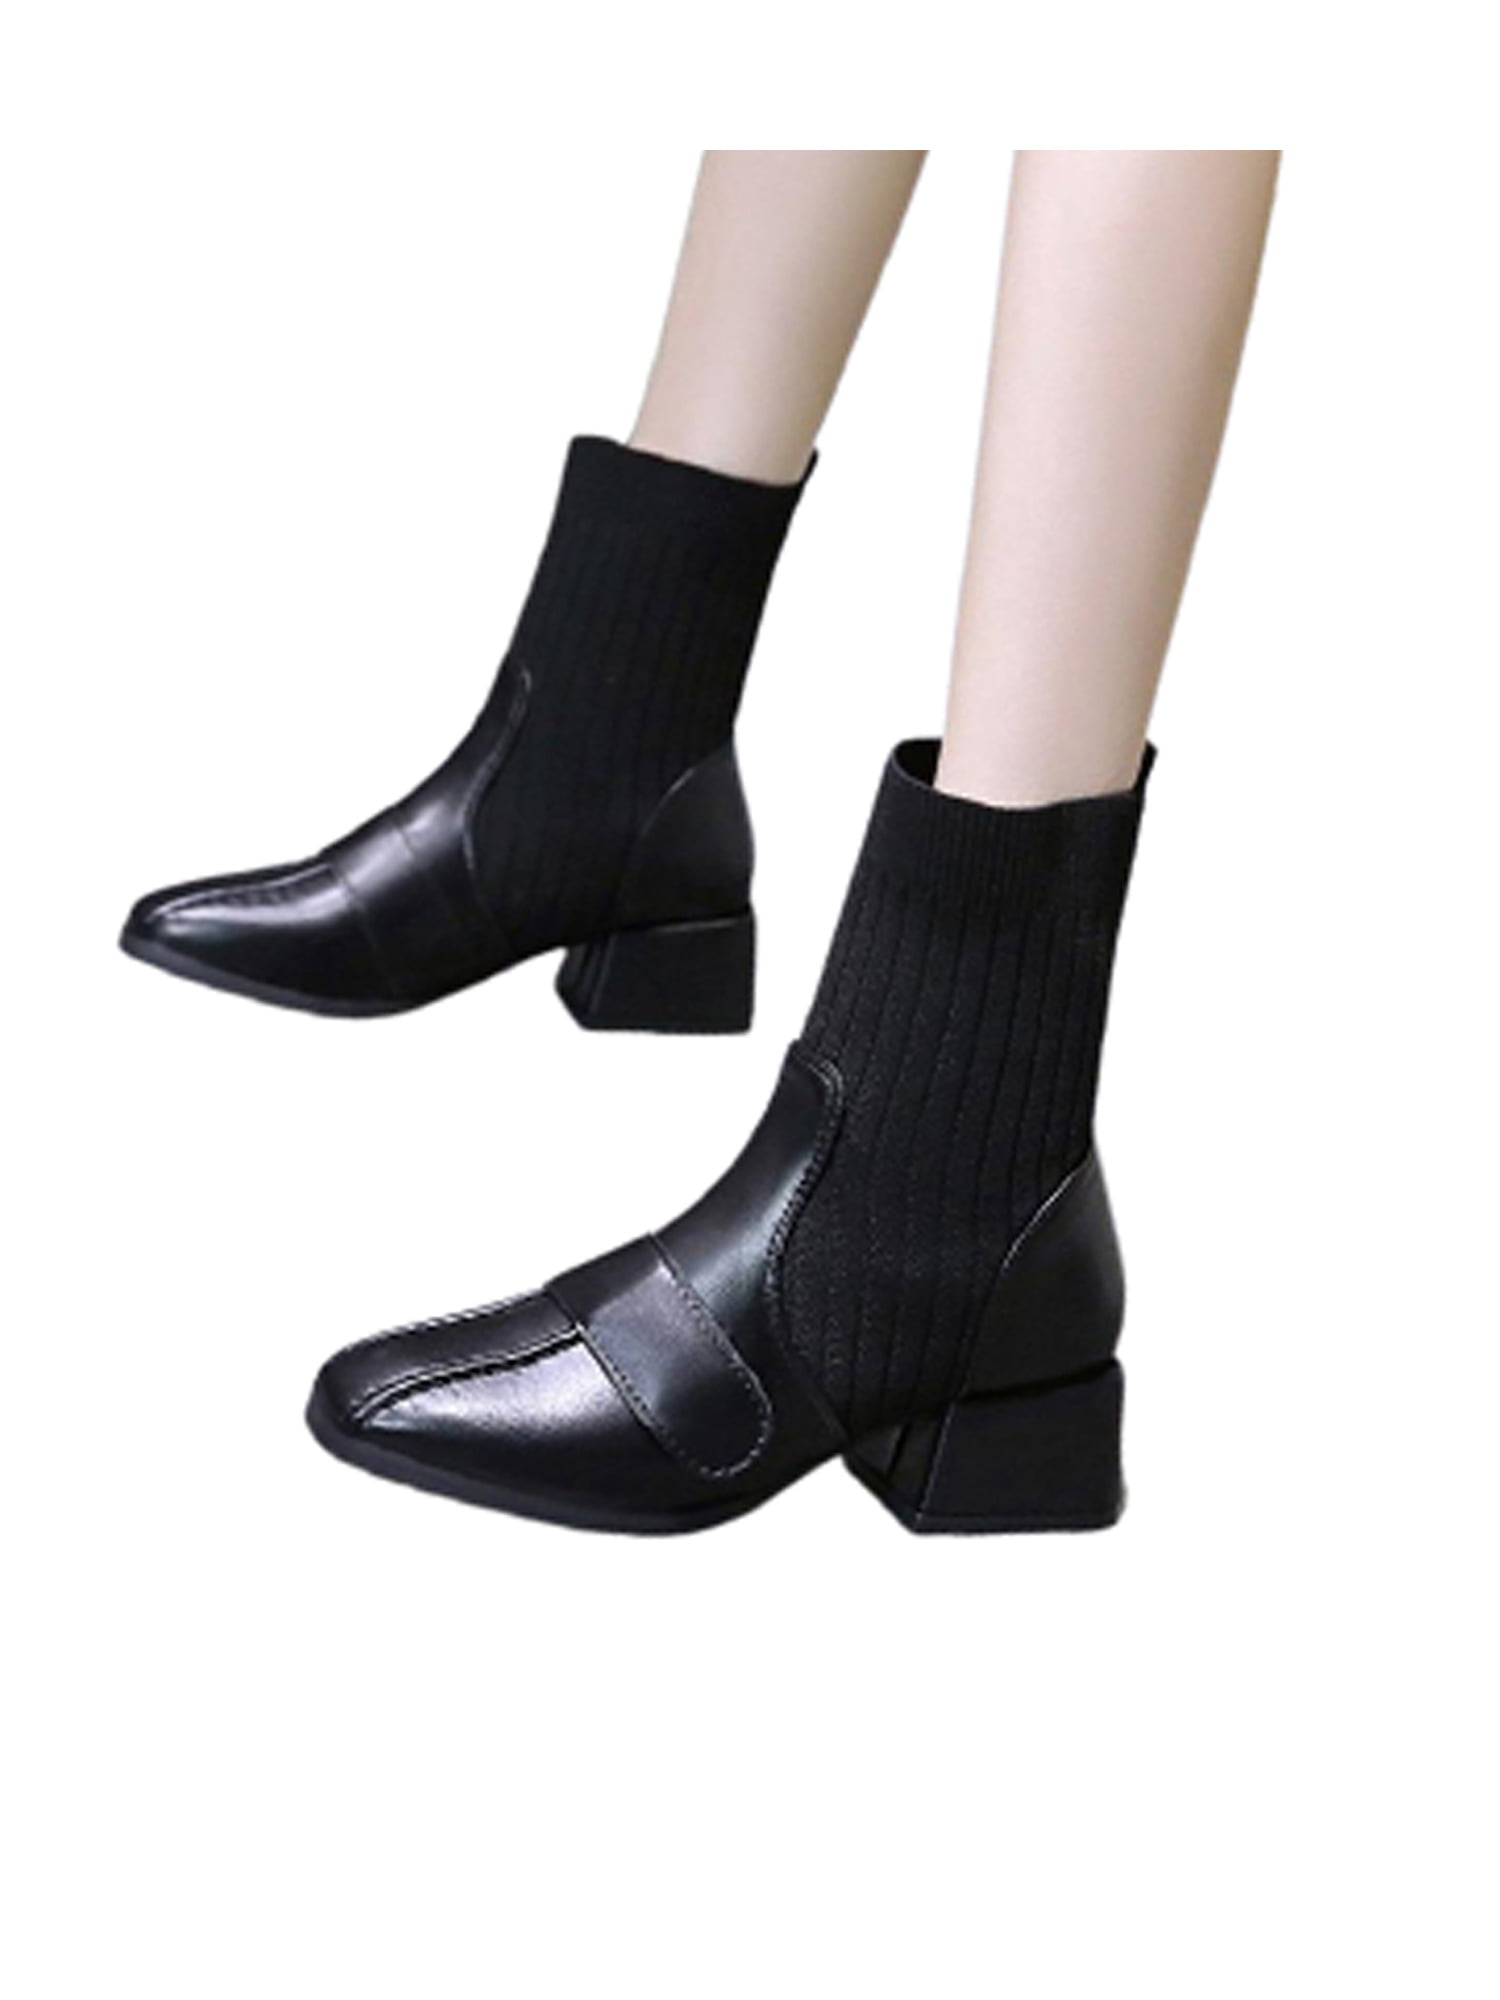 Womens Winter Ankle Boots Slip On Chelsea Booties Casual Low Block Heel Shoes